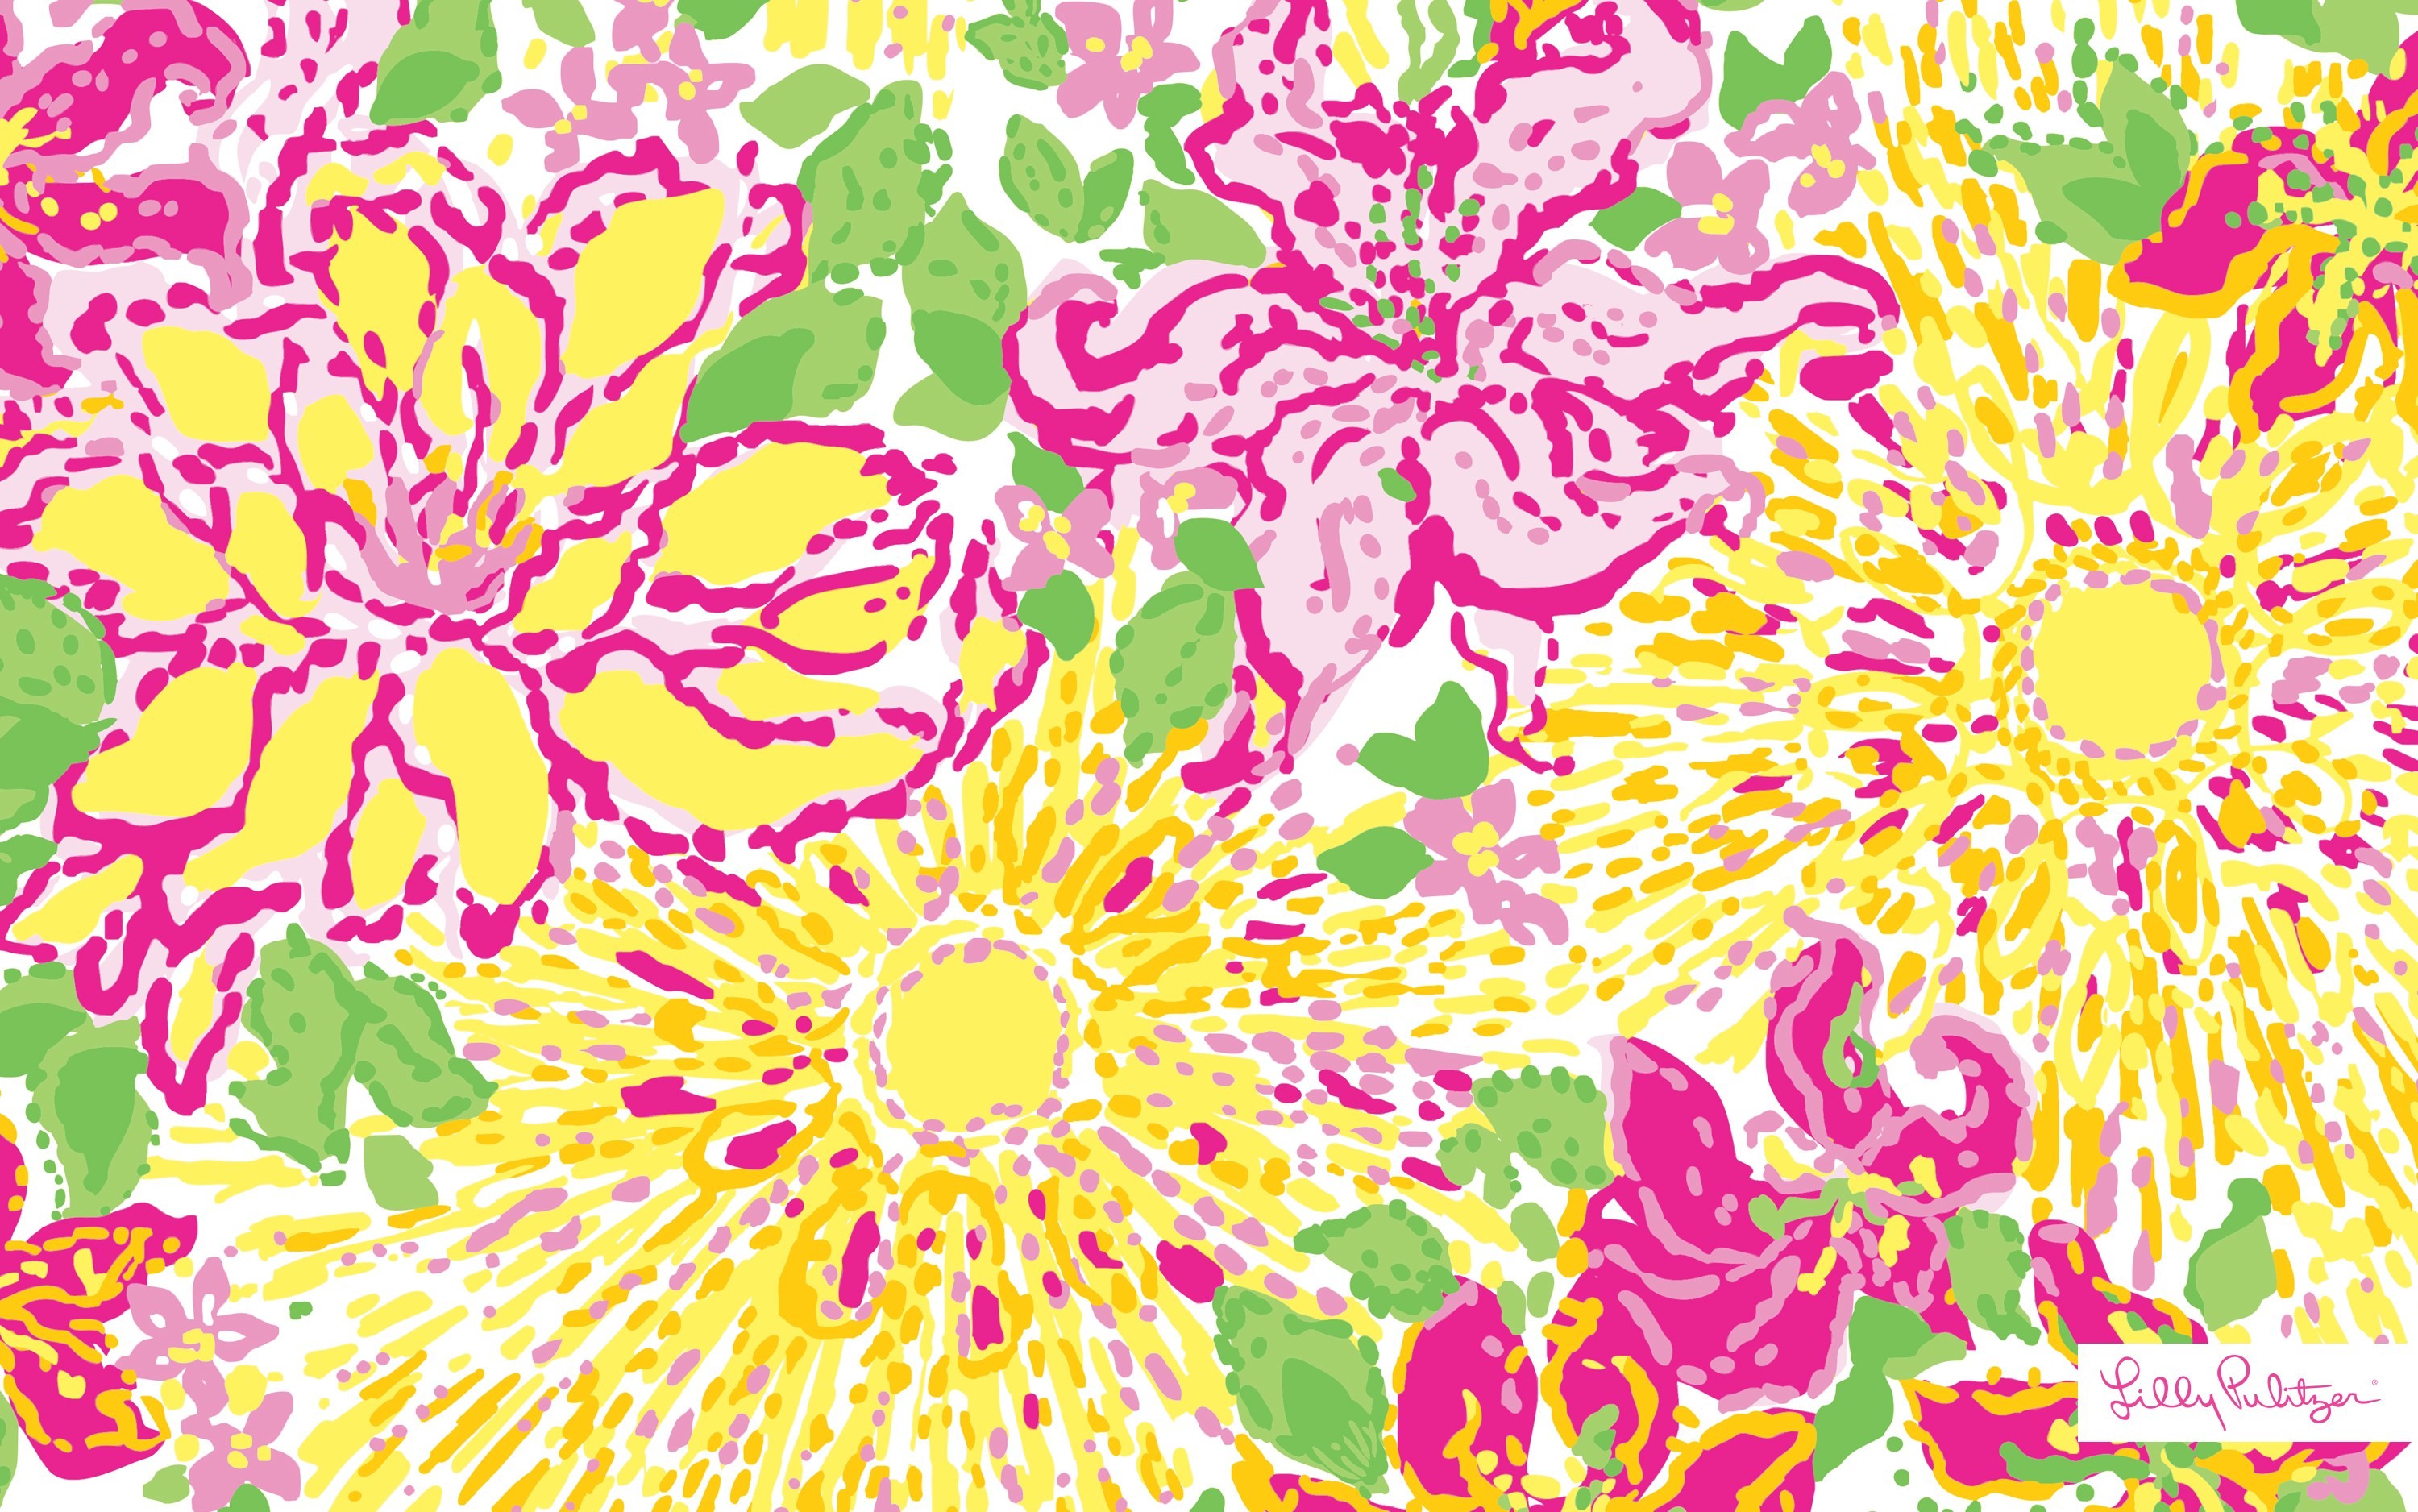 Lilly Pulitzer Wallpaper ·① Download Free Awesome Hd Wallpapers For